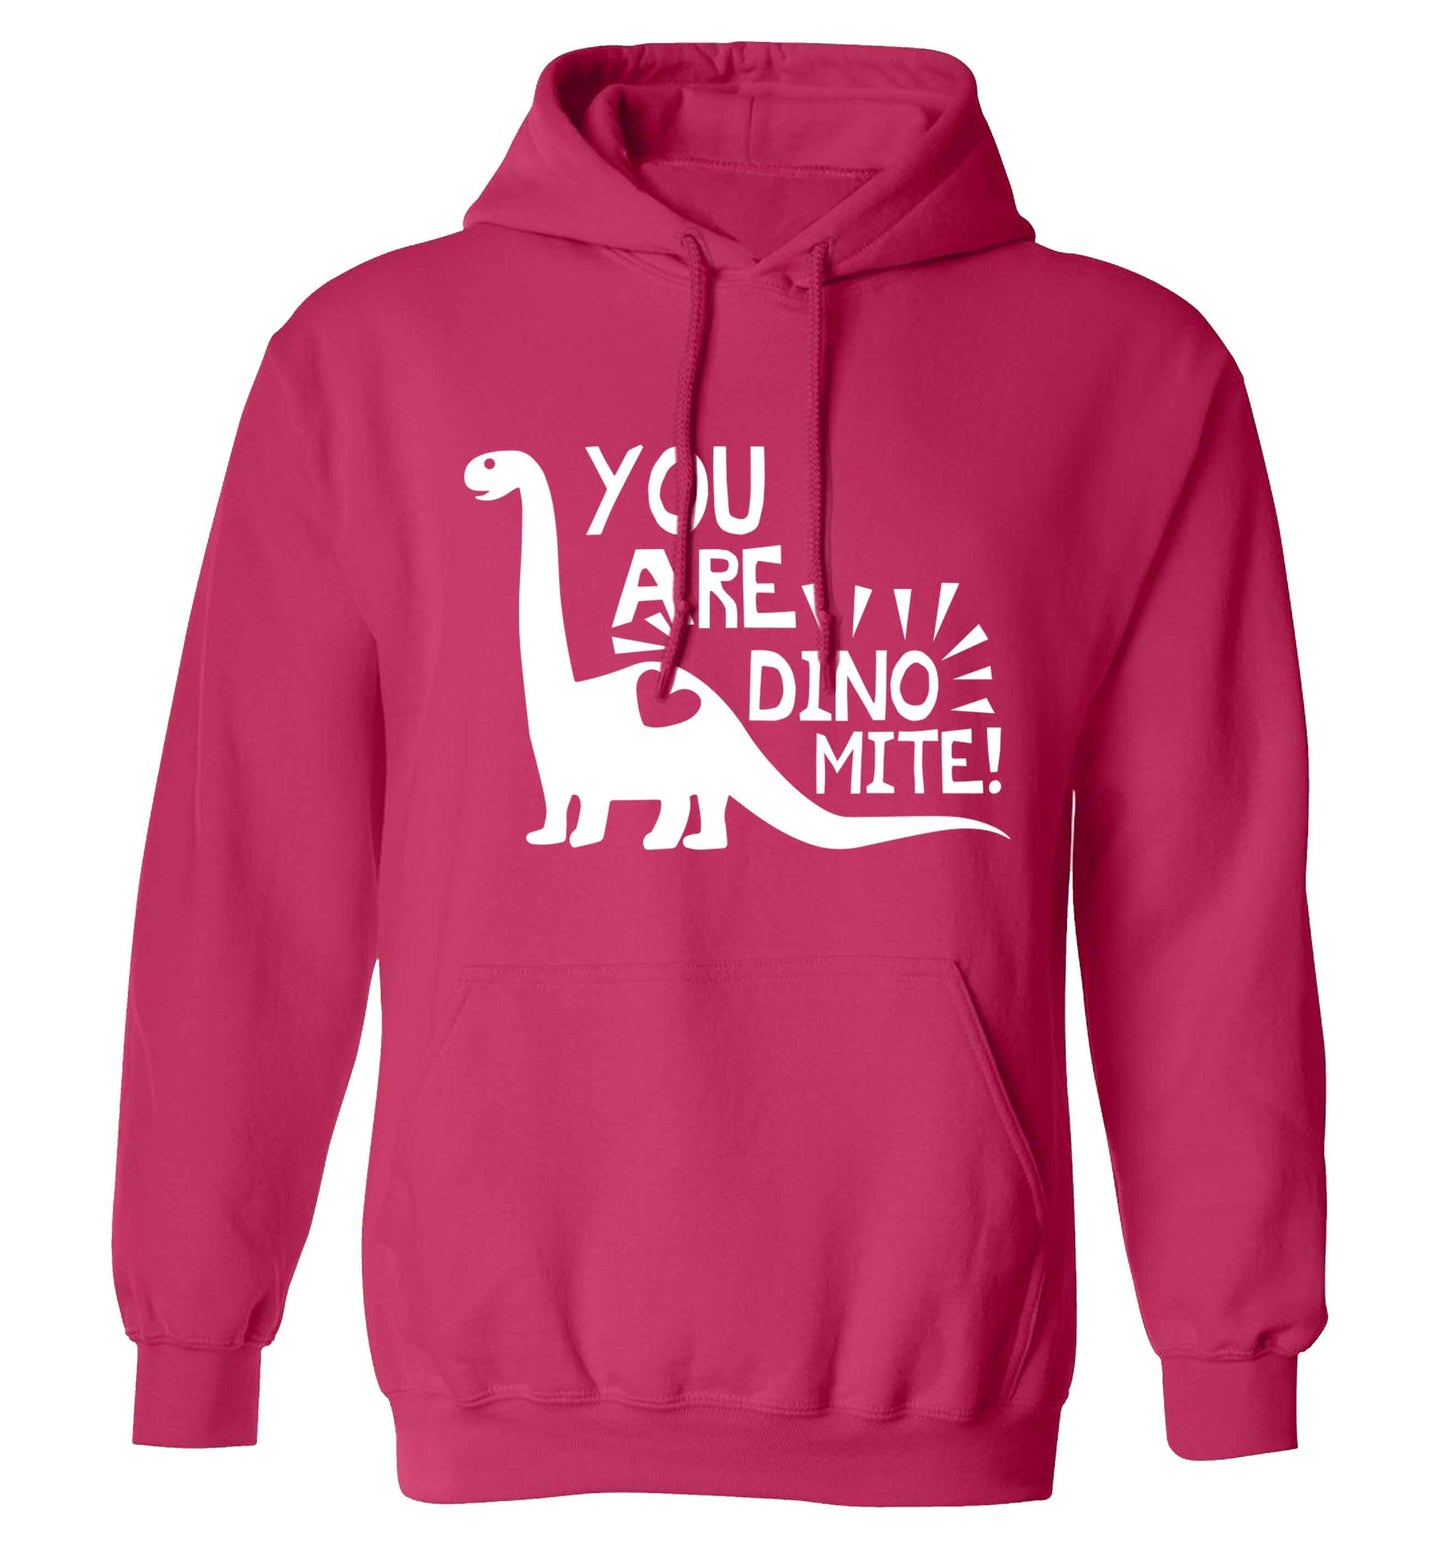 You are dinomite! adults unisex pink hoodie 2XL